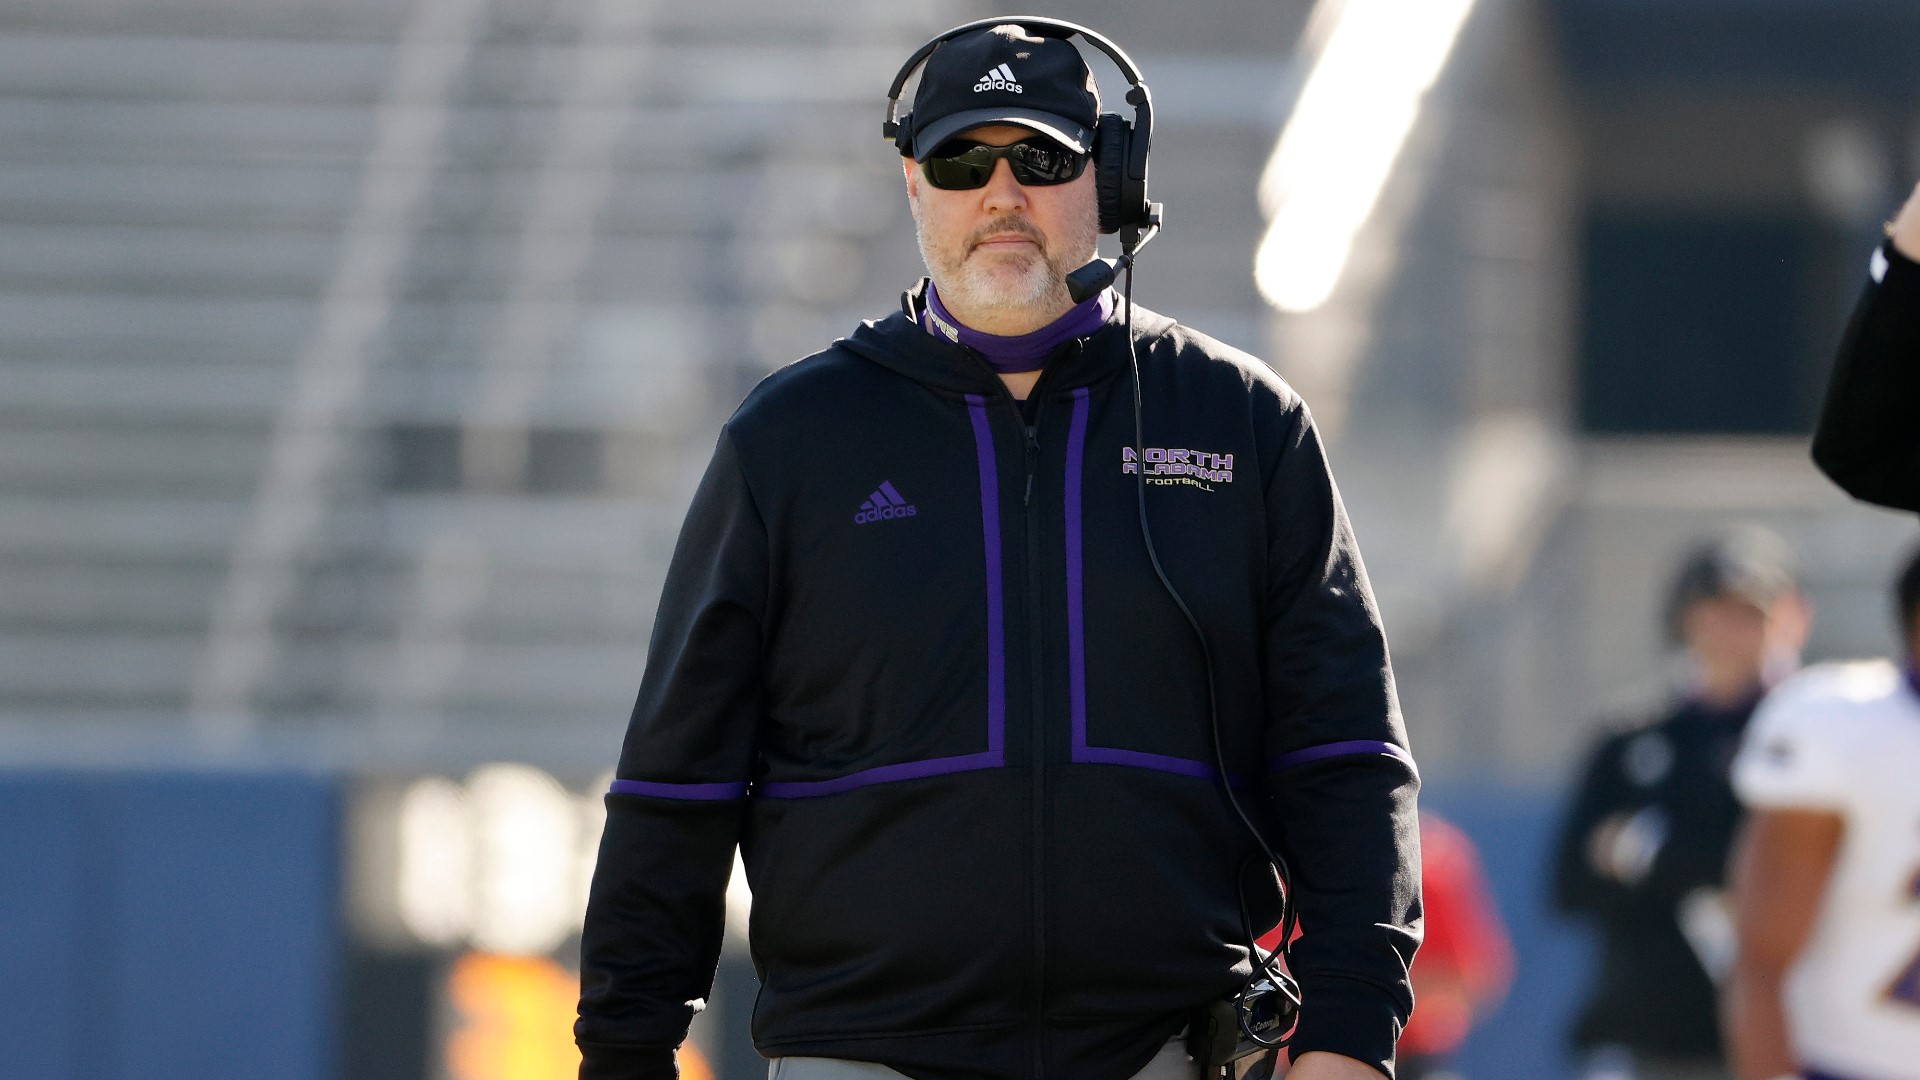 UNA Director of Athletics Dr. Josh Looney has announced a change in the leadership of the football program. Head Coach Chris Willis closes his six seasons at UNA